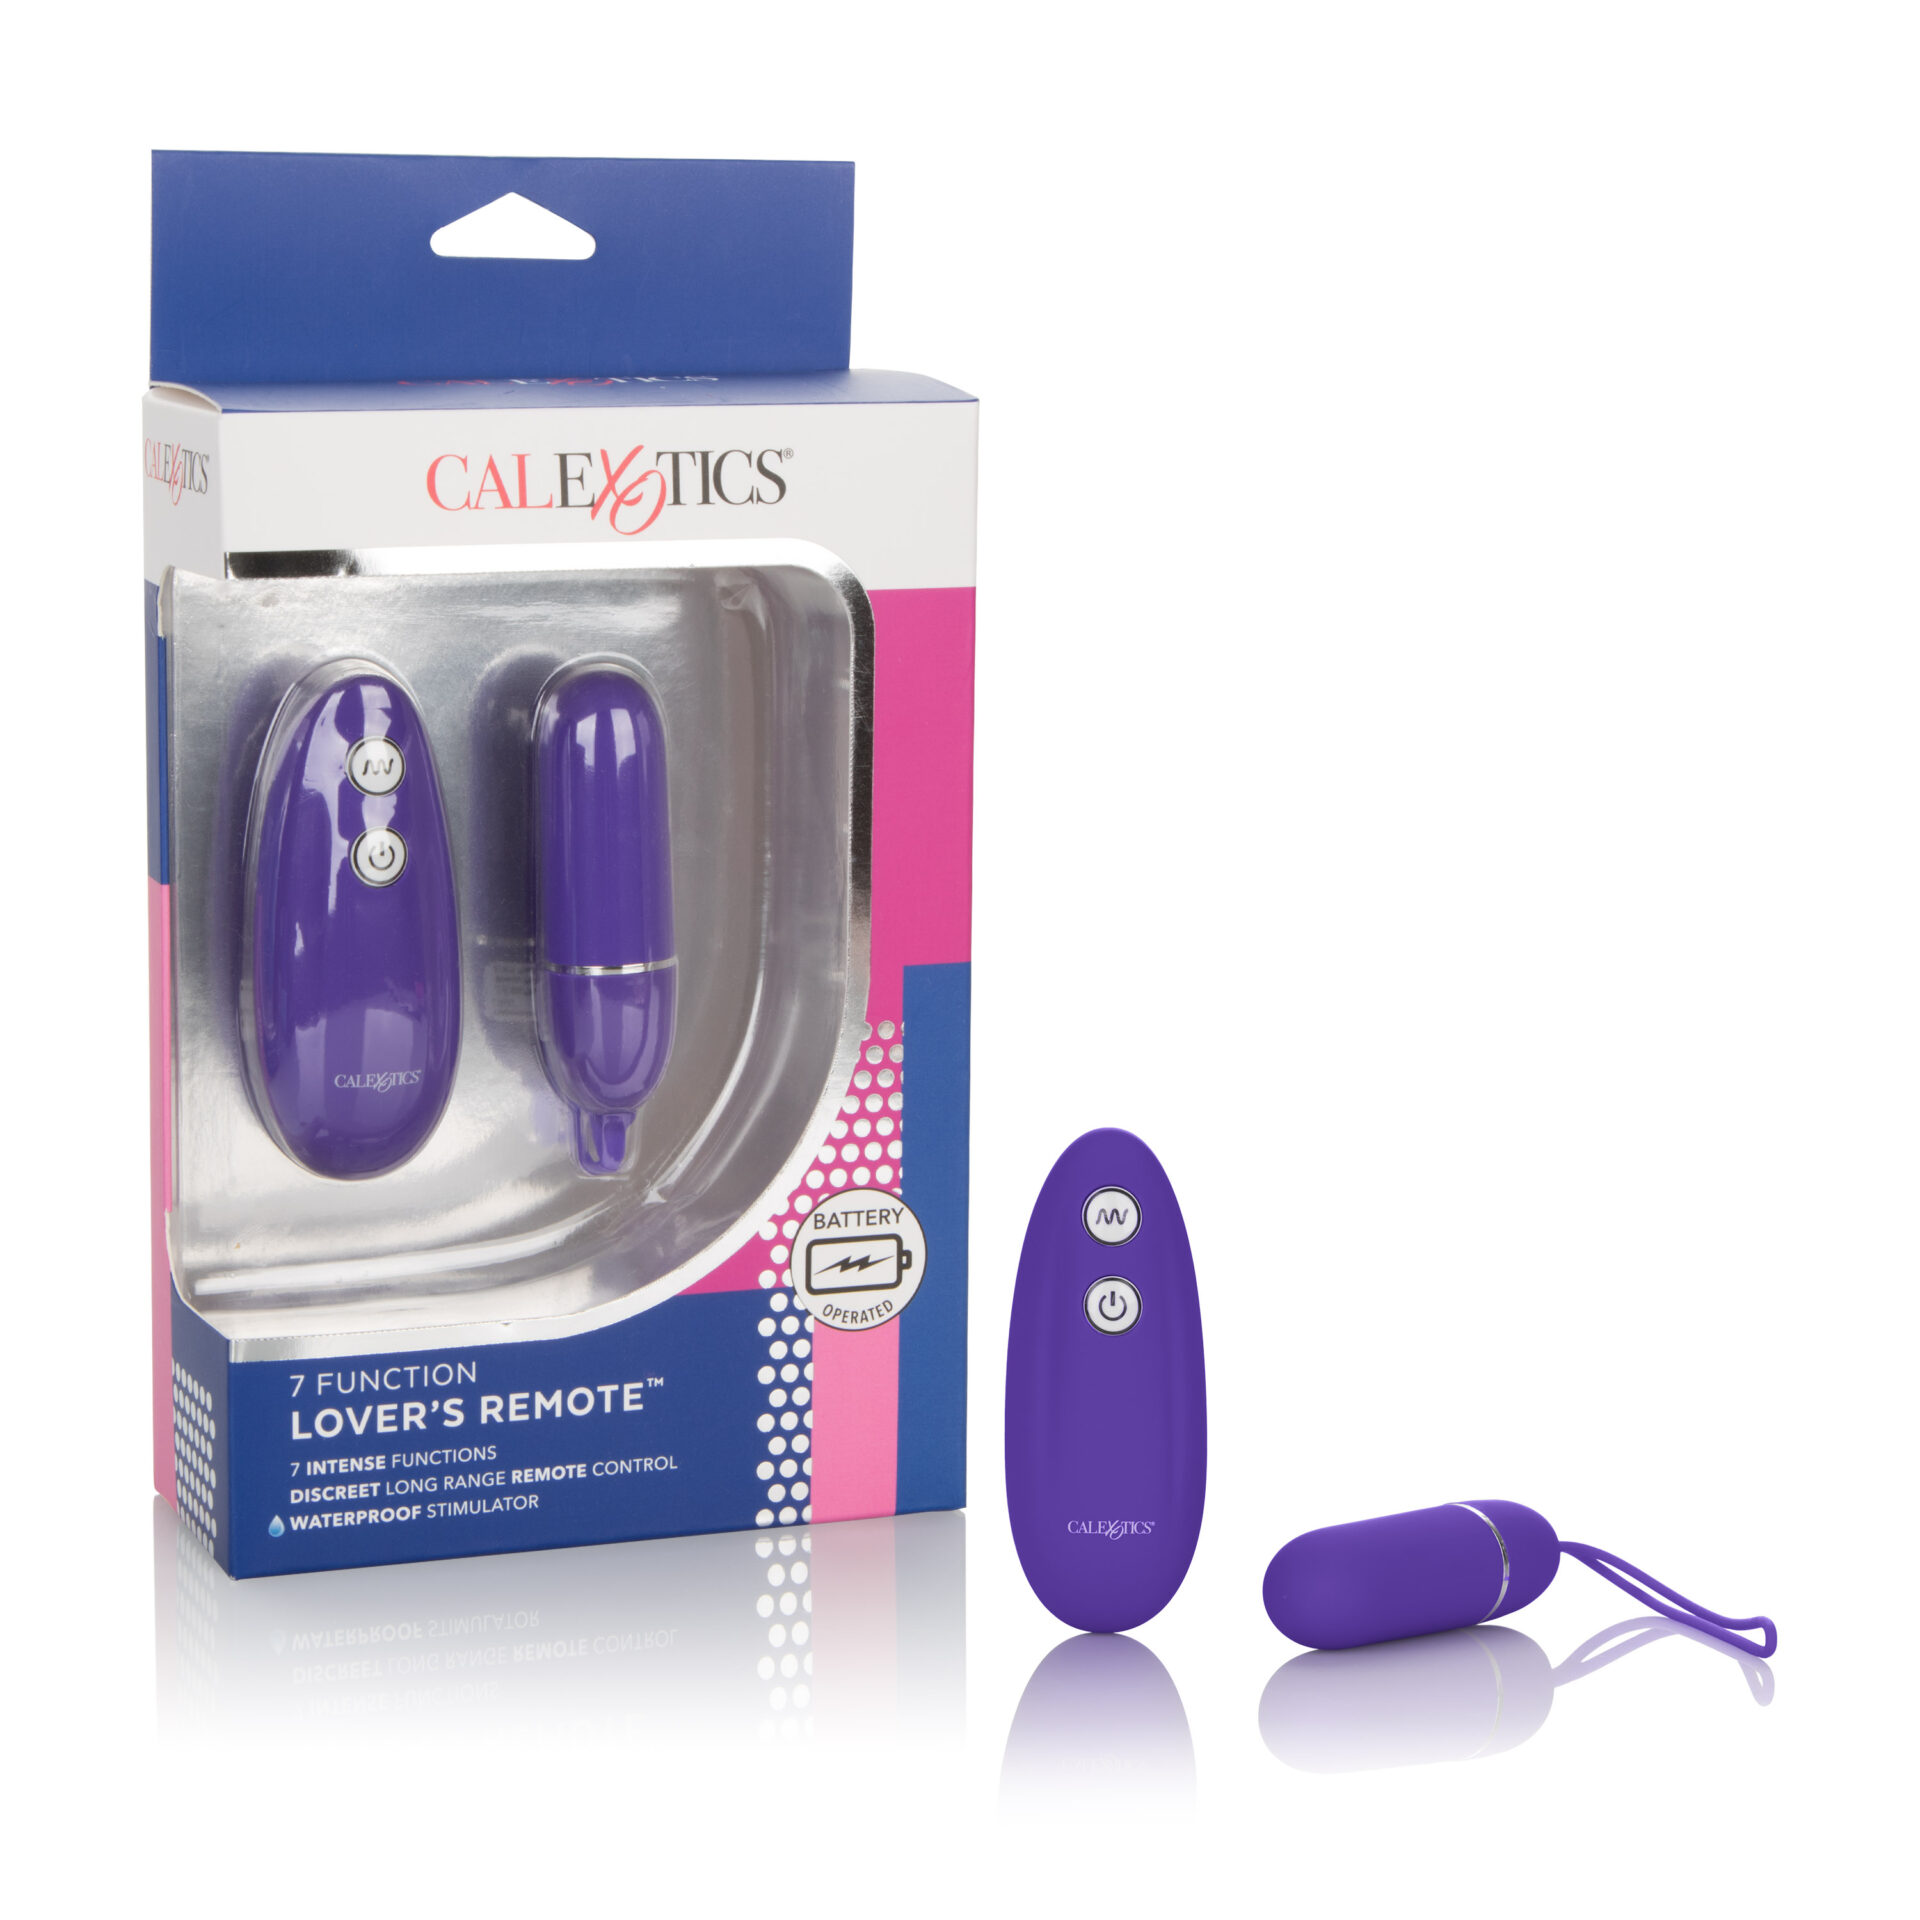 7 Functions Lover's remote purple